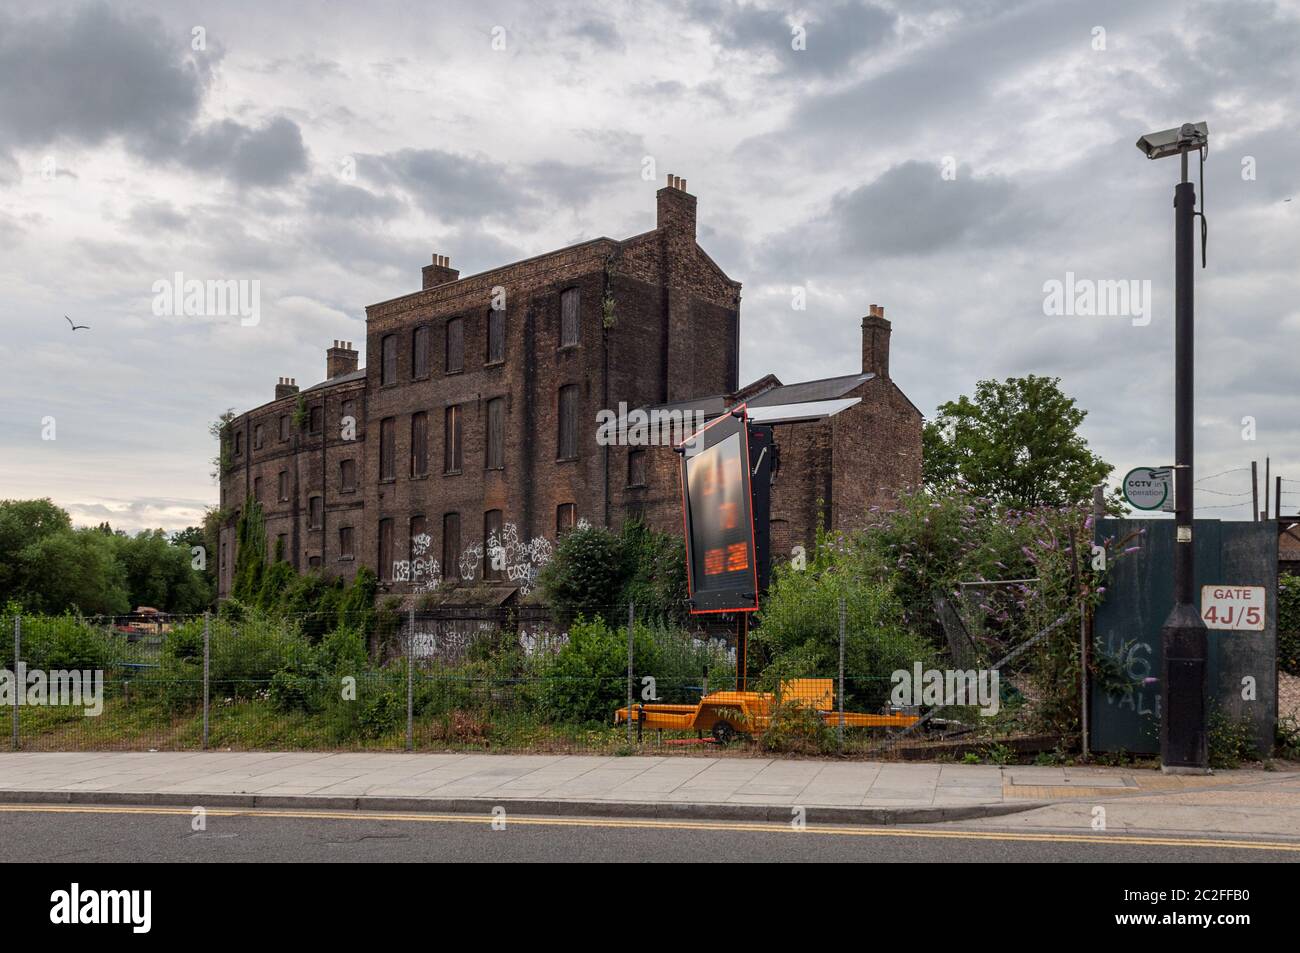 London, England, UK - July 13, 2010: Graffiti covers the boarded up and derelict Coal Office building awaiting redevelopment of the King's Cross goods Stock Photo